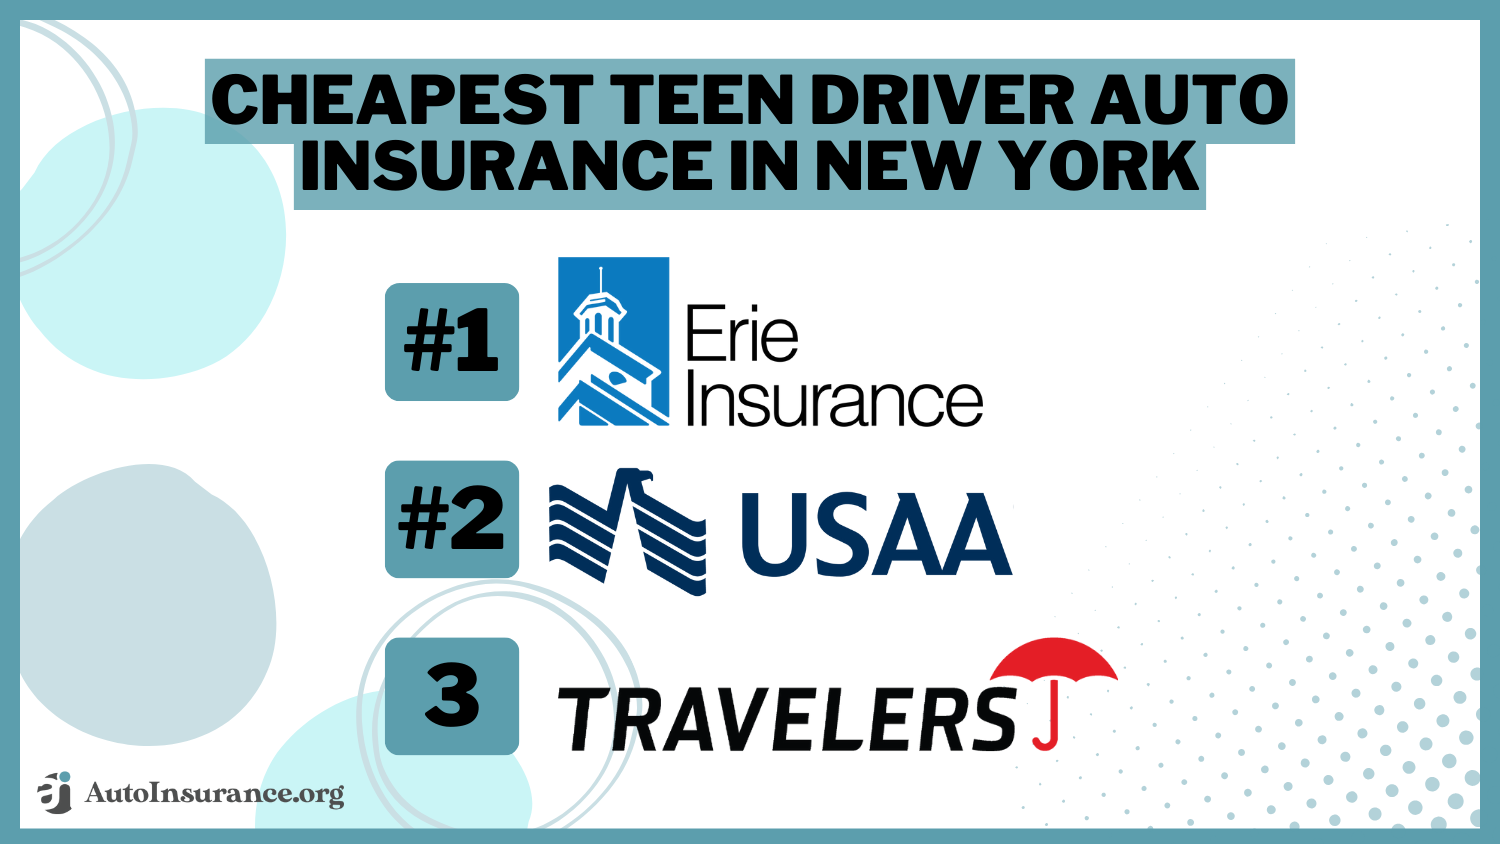 cheapest teen driver auto insurance in New York: Erie, USAA, Travelers